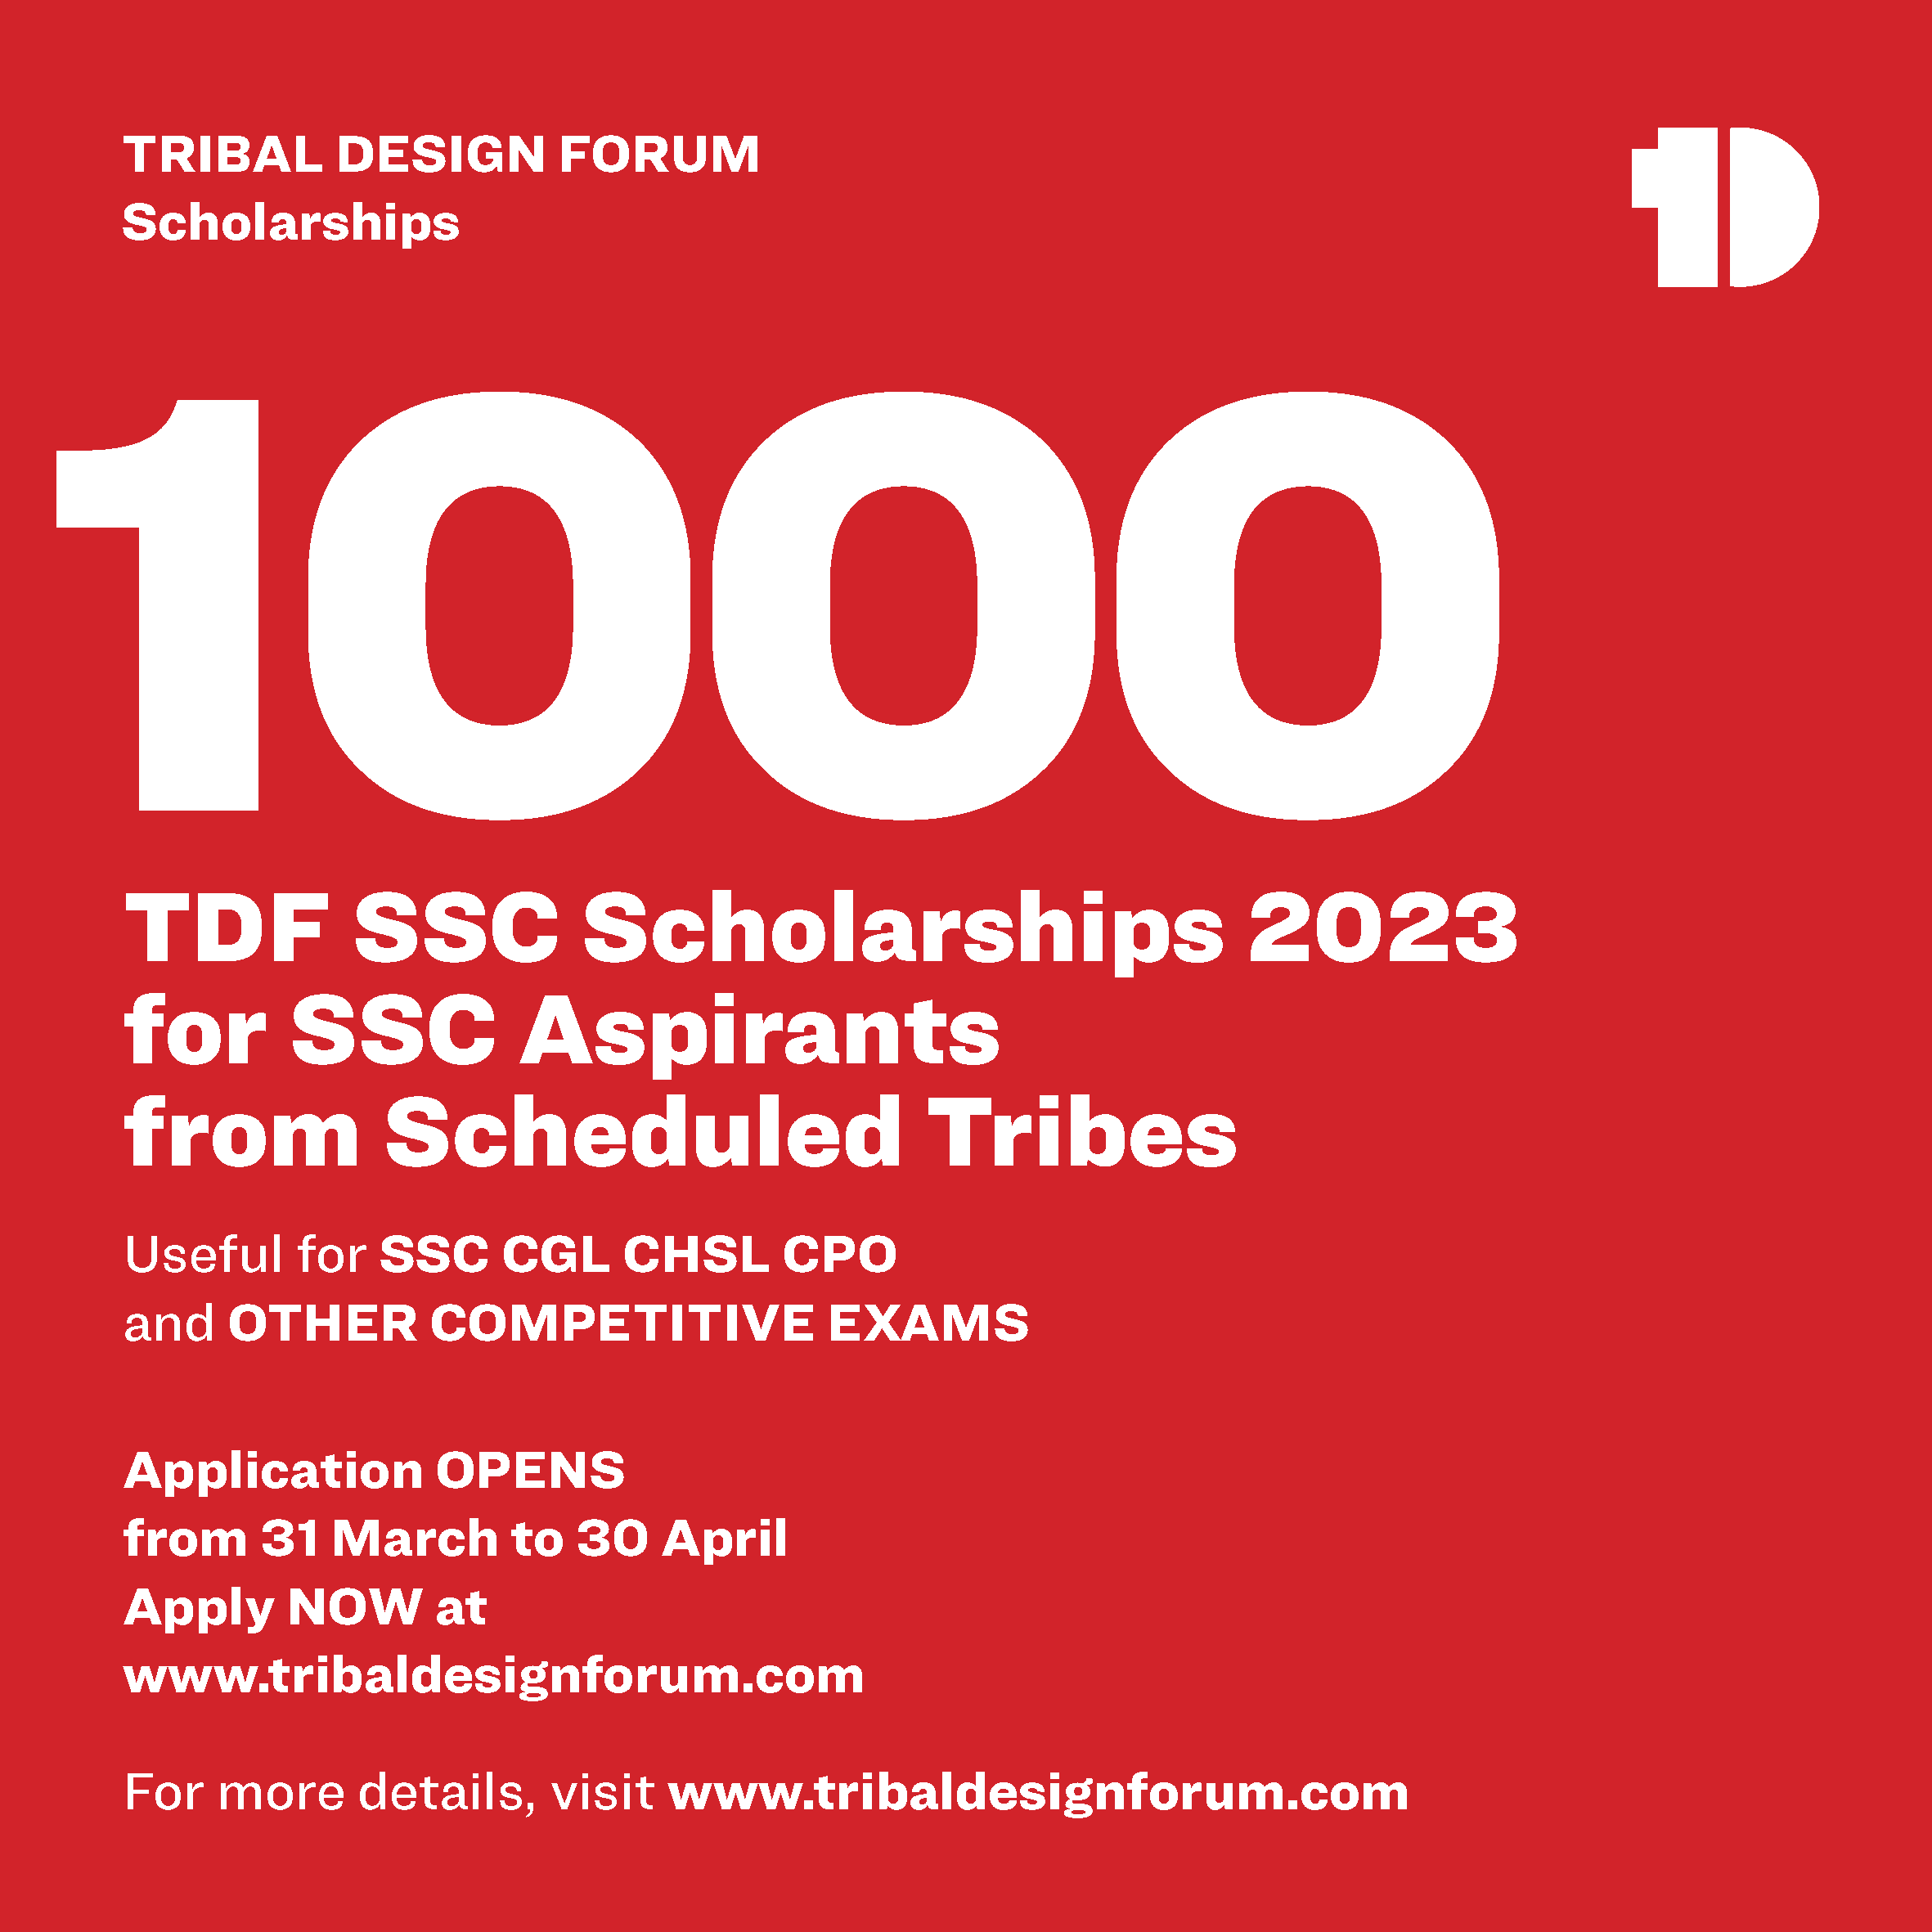  1000 Scholarships for SSC Aspirants from Scheduled Tribes   